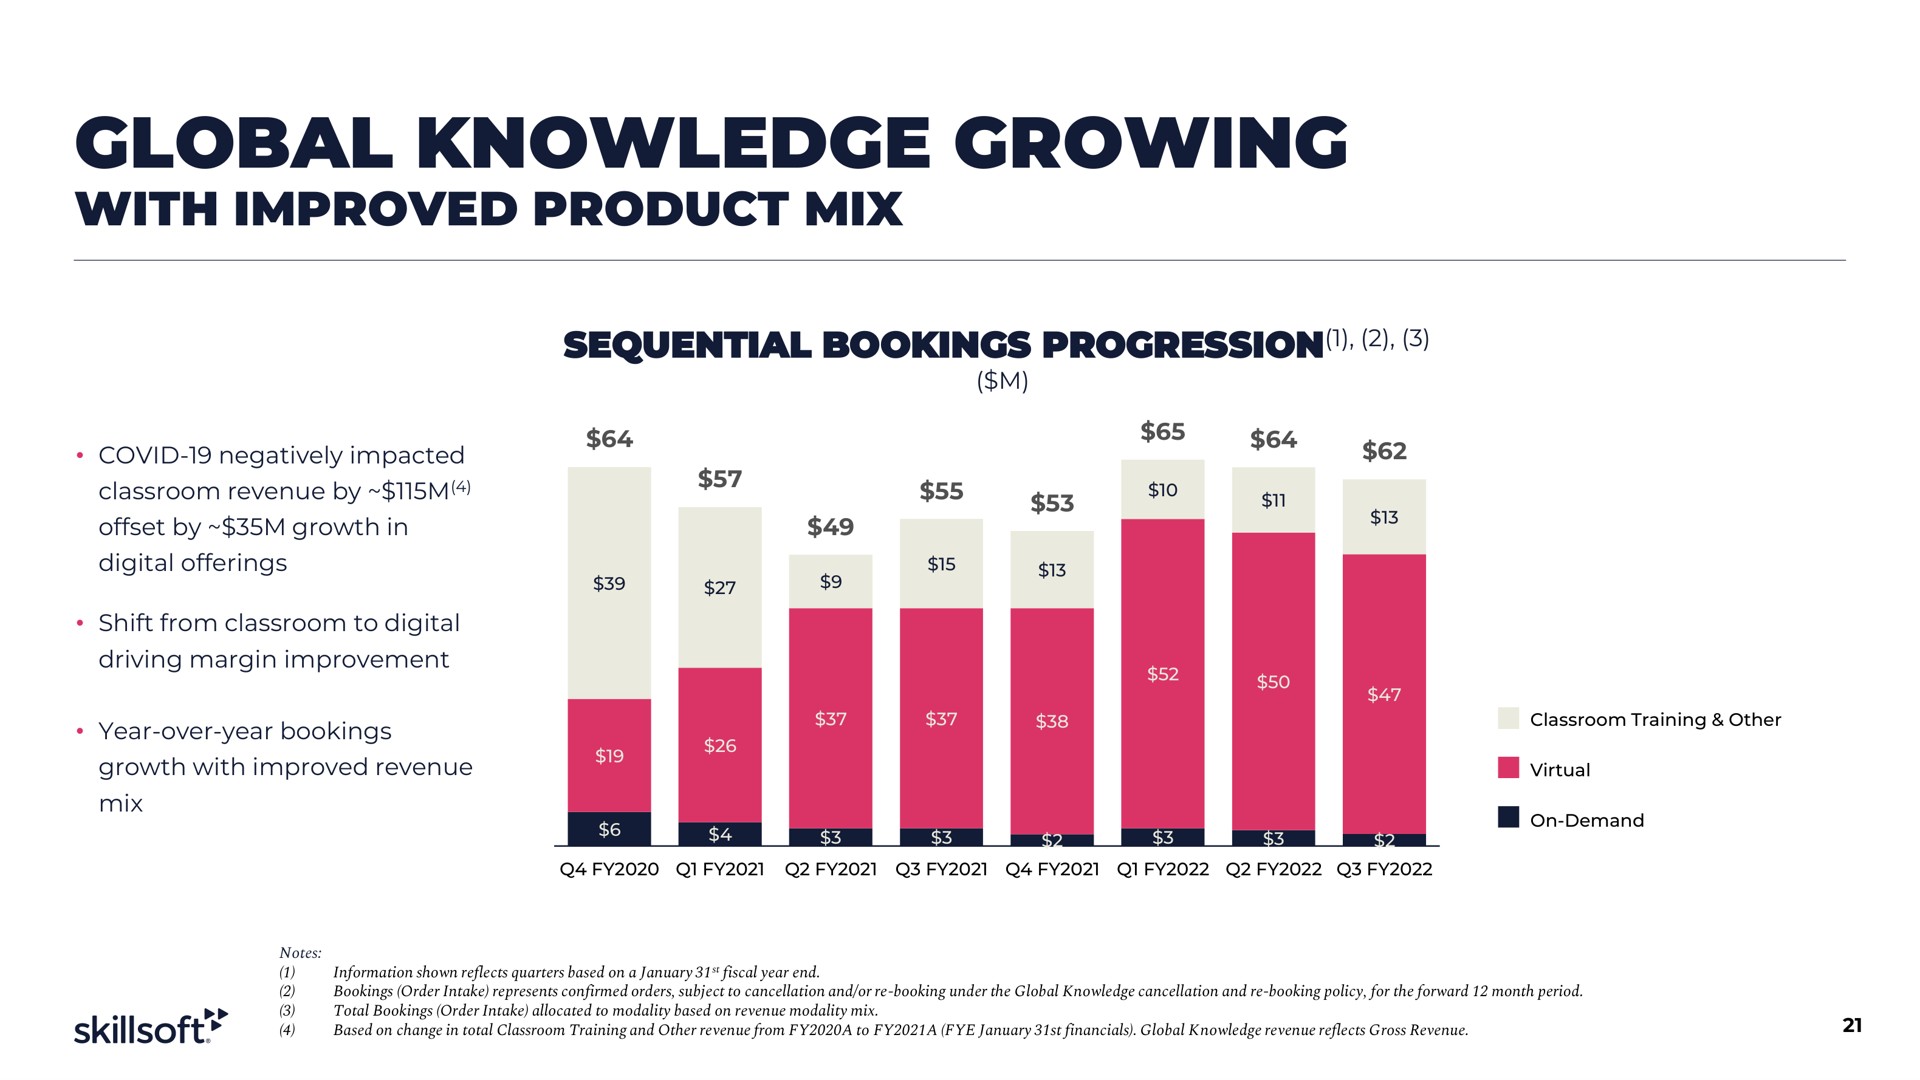 global knowledge growing with improved product mix | Skillsoft